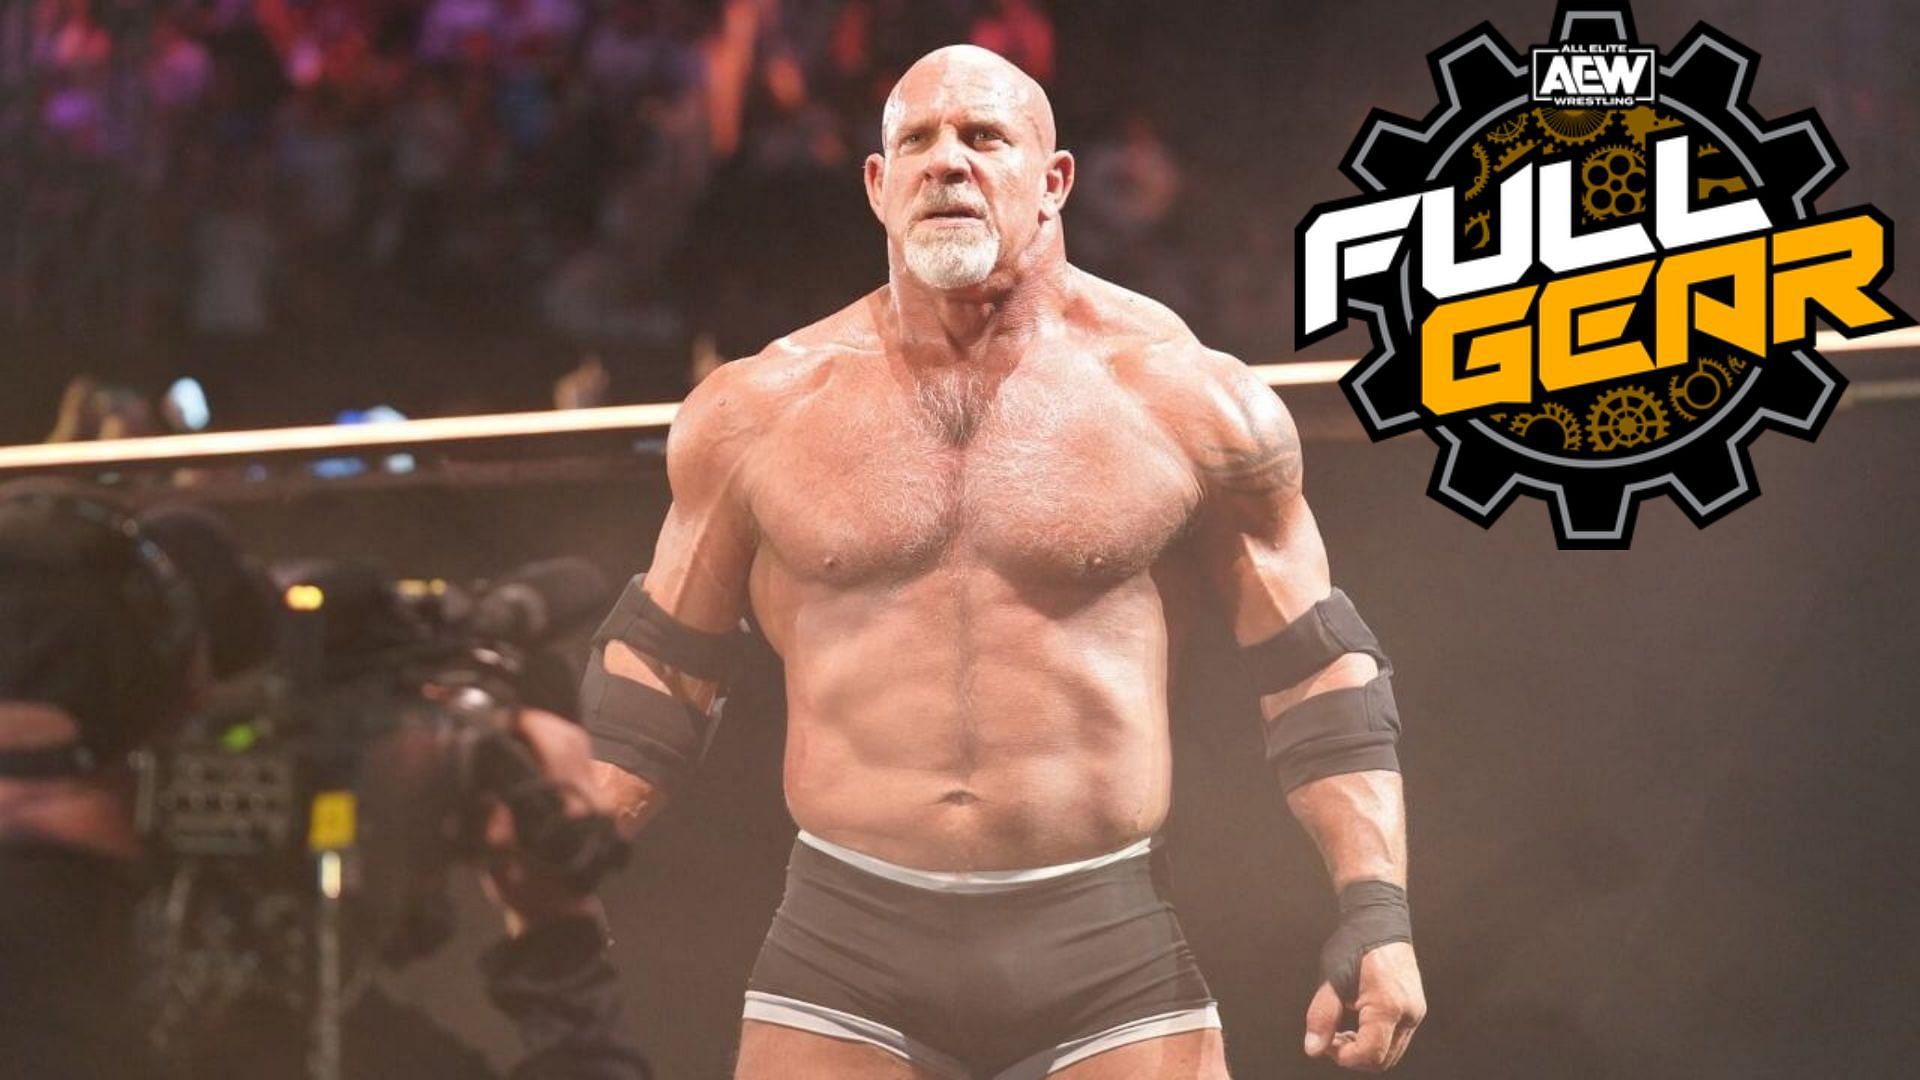 Goldberg was recently referenced at AEW Full Gear